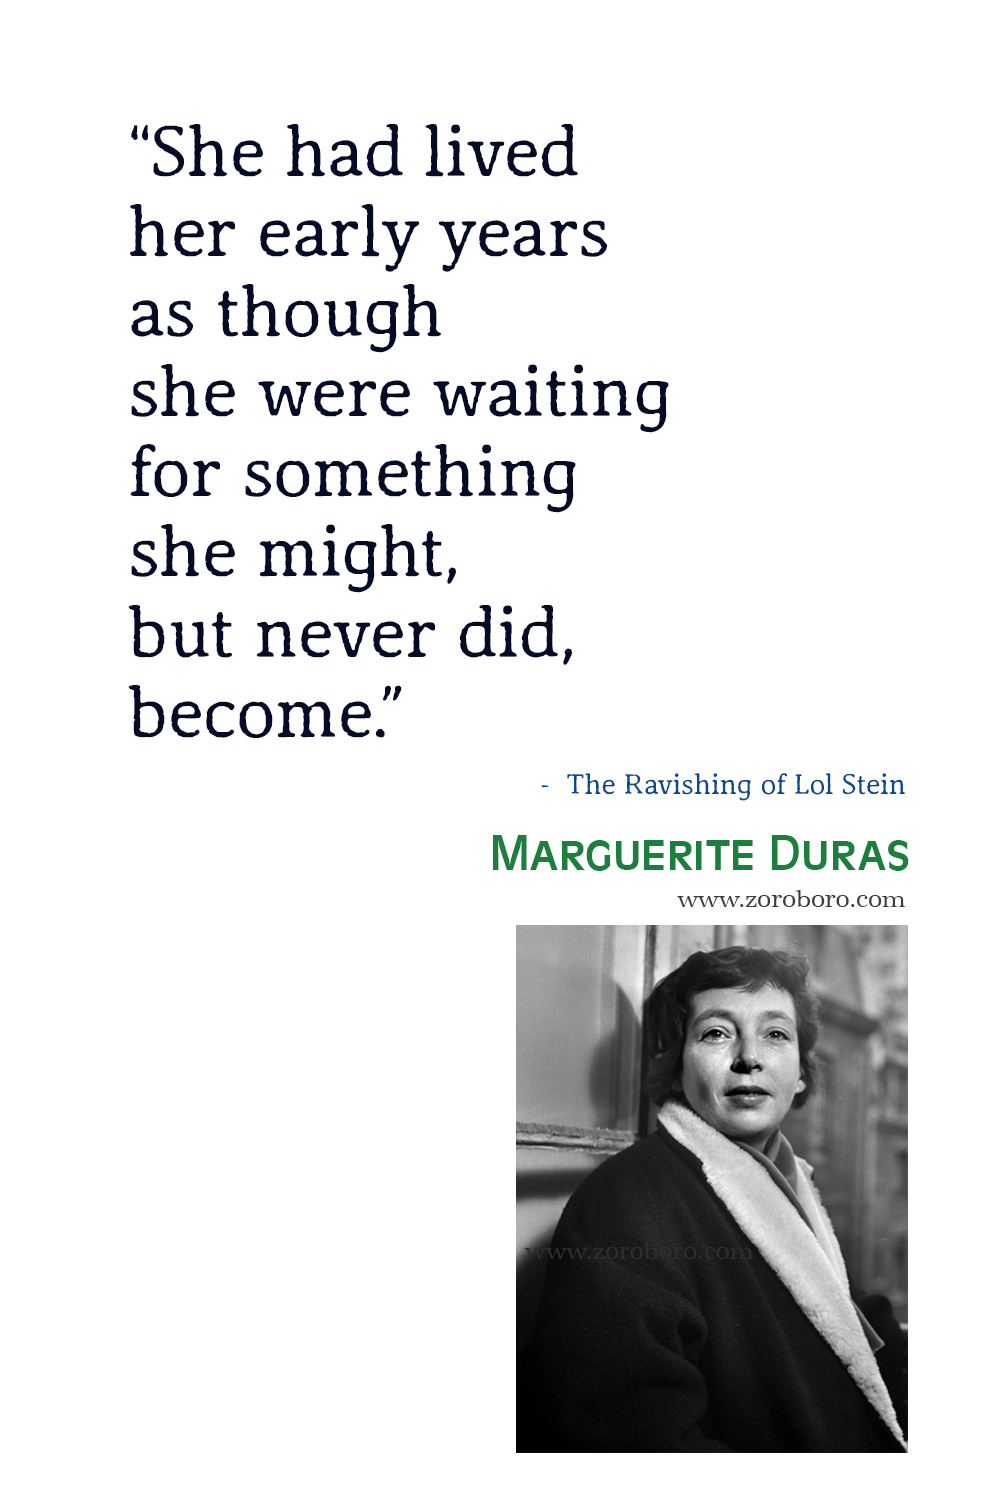 Marguerite Duras Quotes, Marguerite Duras, The Ravishing of Lol Stein, The Lover Quotes, Marguerite Duras Books Quotes, Marguerite Duras Man, Women & Love.